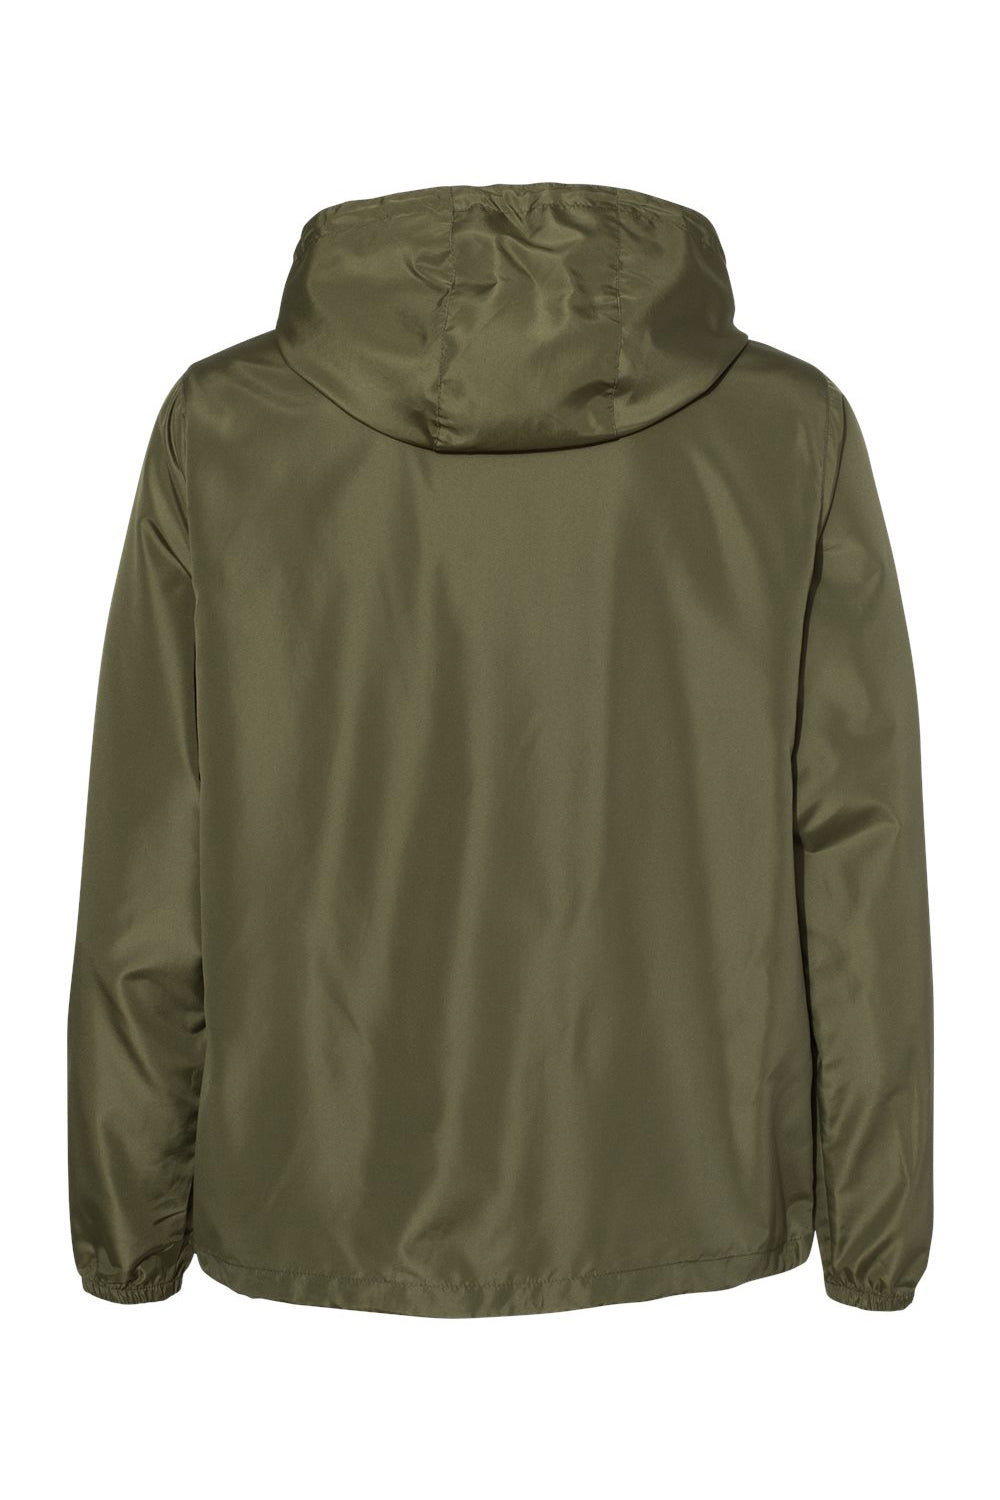 Independent Trading Co. EXP54LWP Mens 1/4 Zip Windbreaker Hooded Jacket Army Green Flat Back